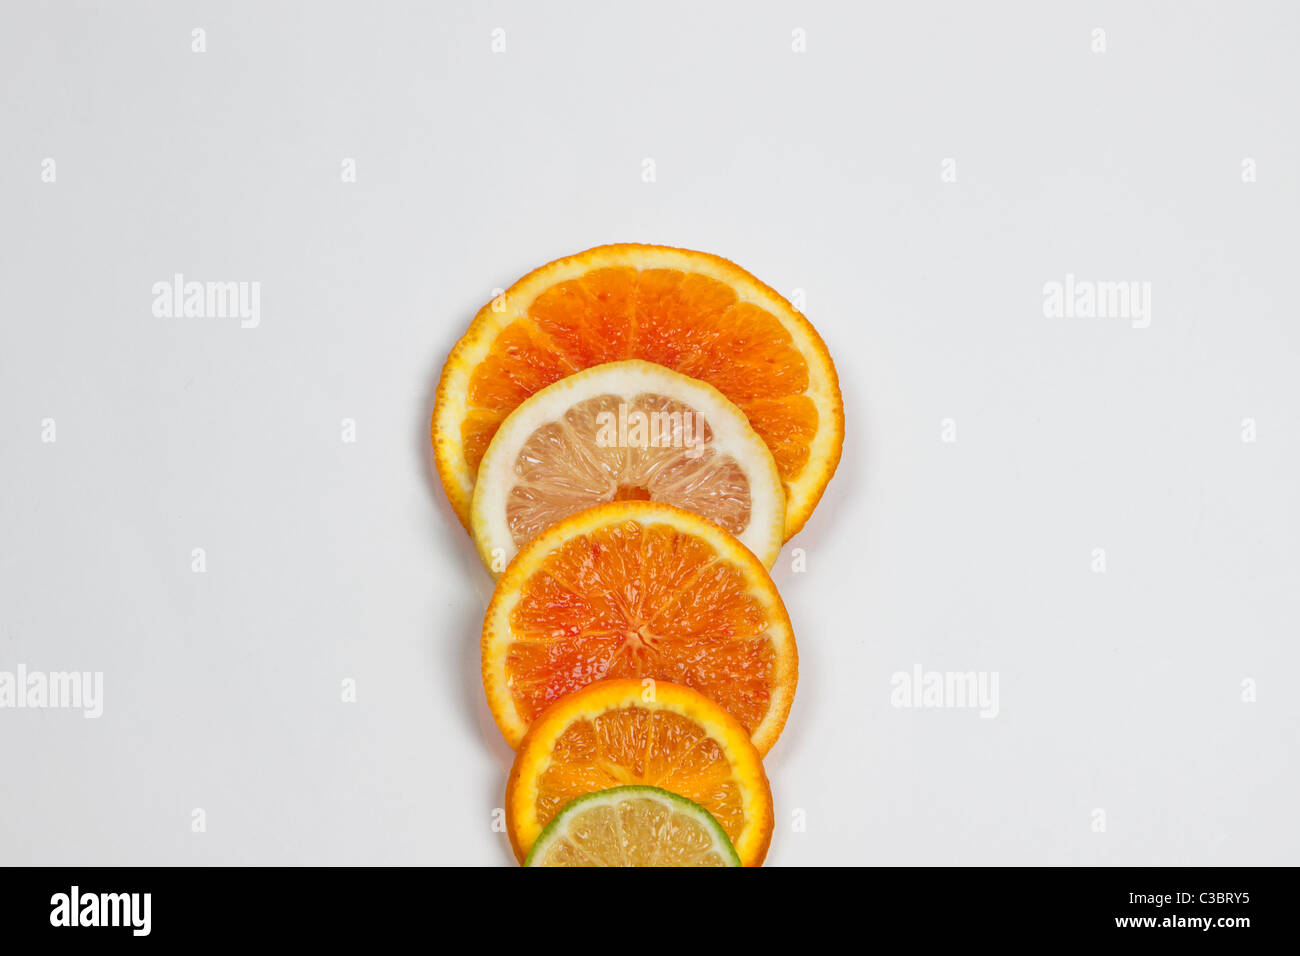 slices of citrus fruits Stock Photo